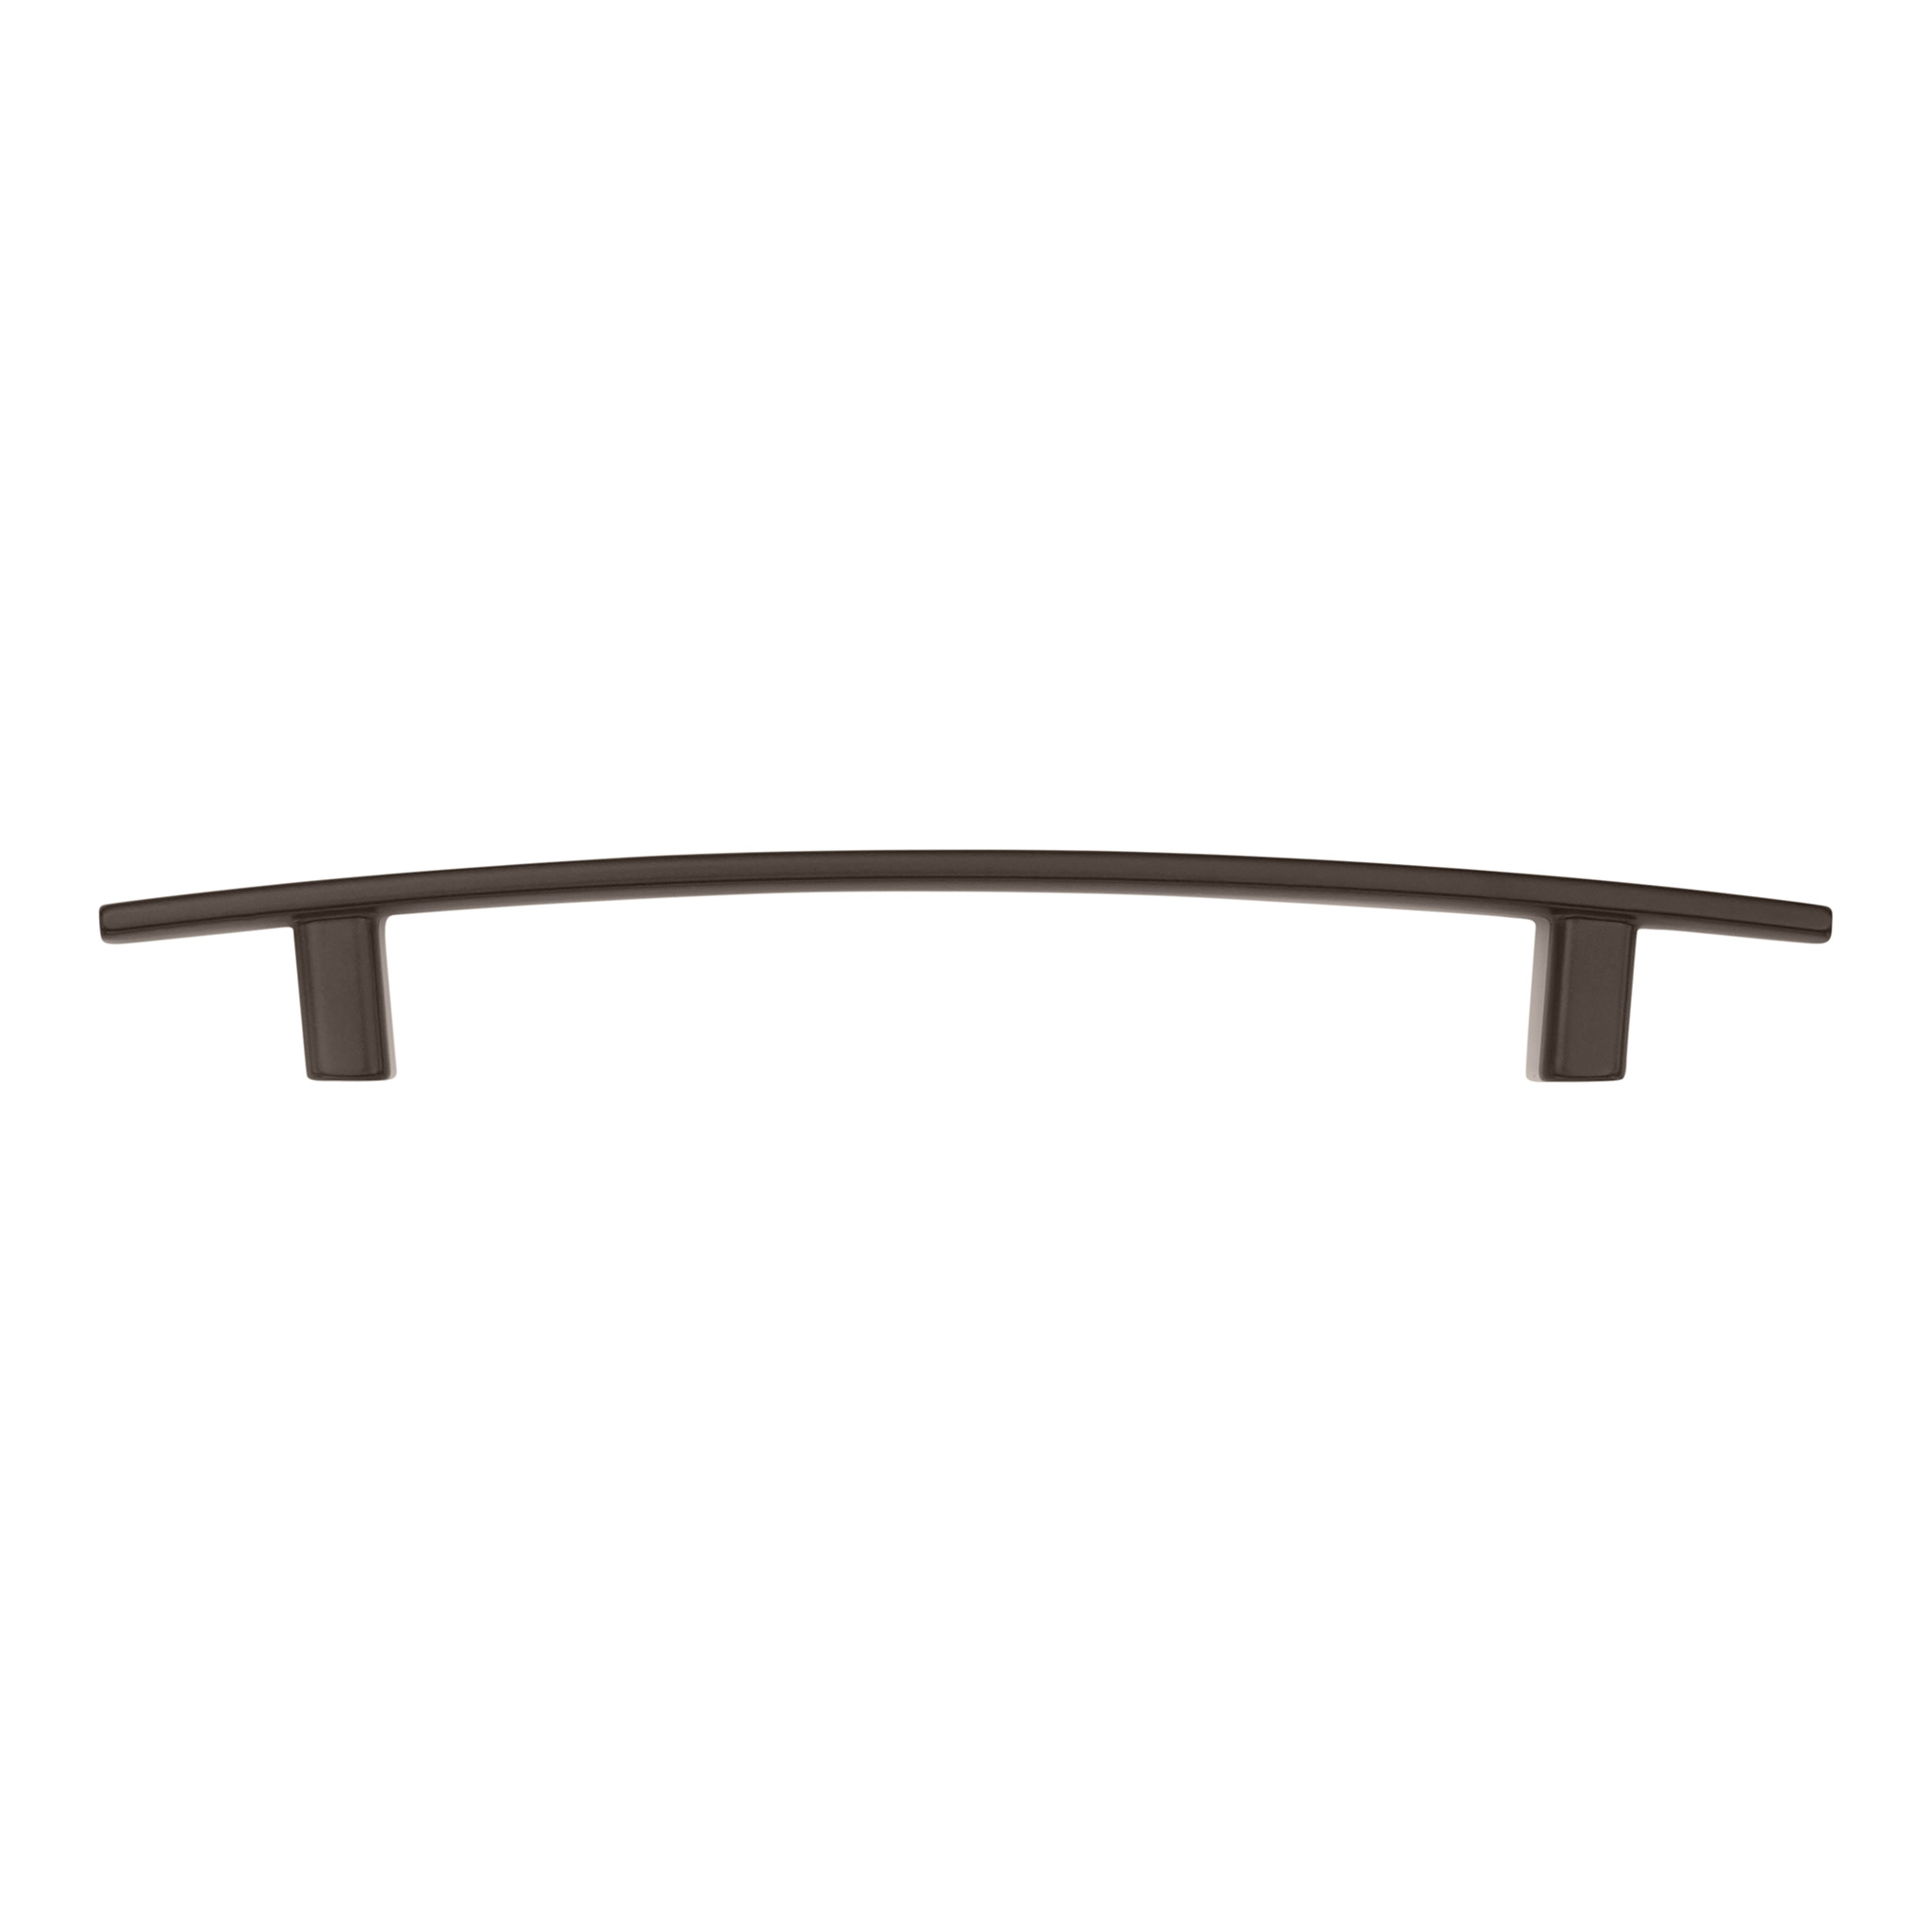 Kemsley Classic Pull, 160mm, Oil-Rubbed Bronze